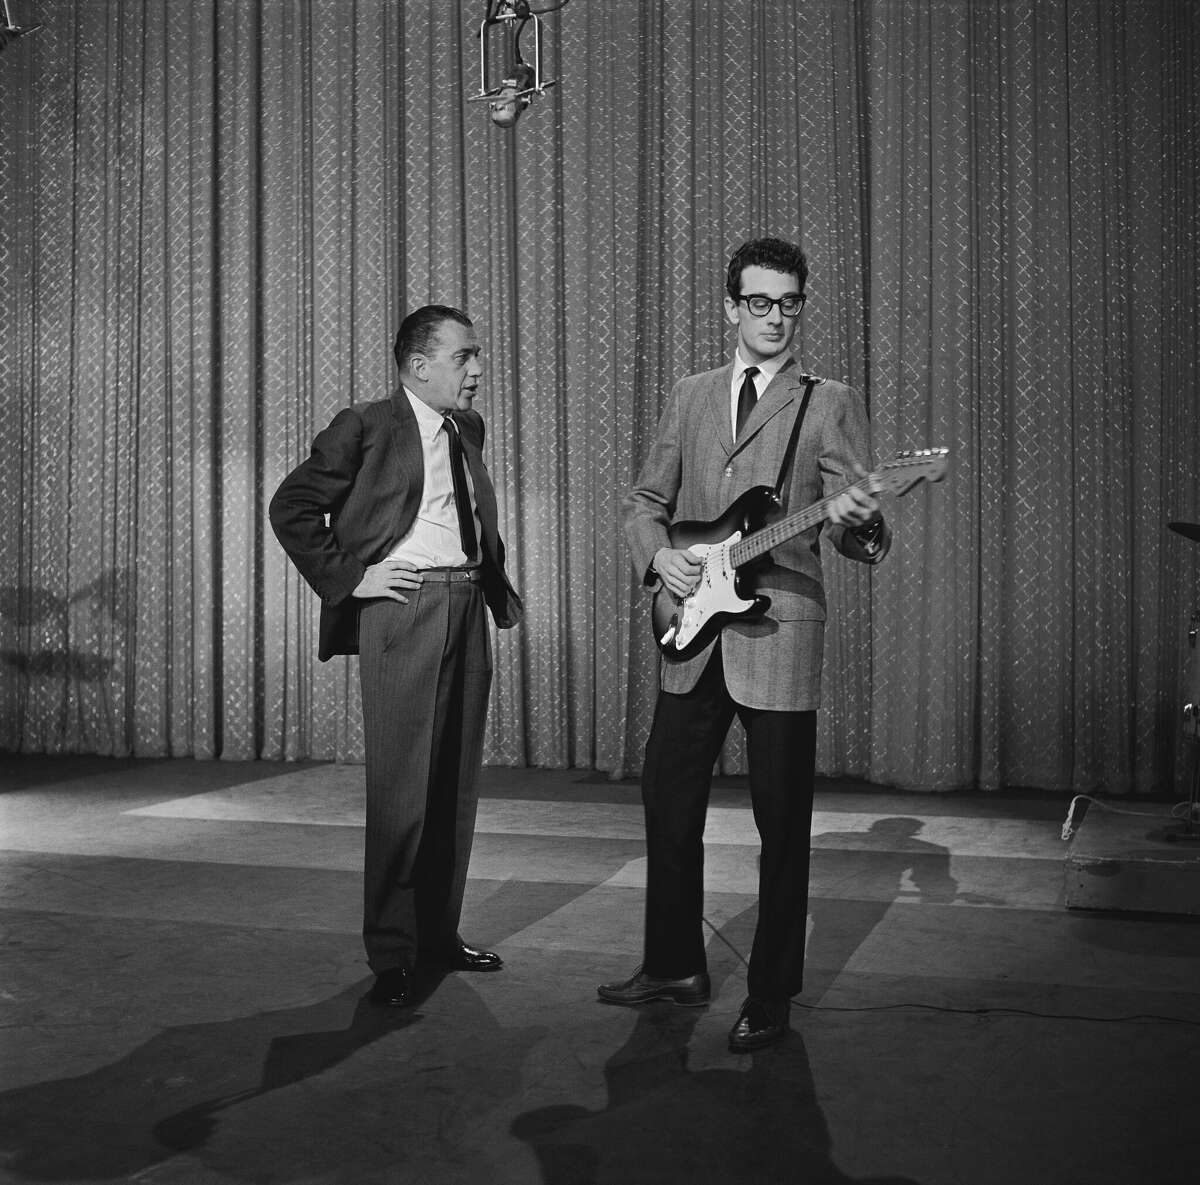 NEW YORK - JANUARY 26, Buddy Holly (Charles Hardin Holley) (with Ed Sullivan) performs on the Ed Sullivan Show at the Ed Sullivan Theatre on January 26, 1958 in New York City, New York. (Photo by Steve Oroz/Michael Ochs Archives/Getty Images)